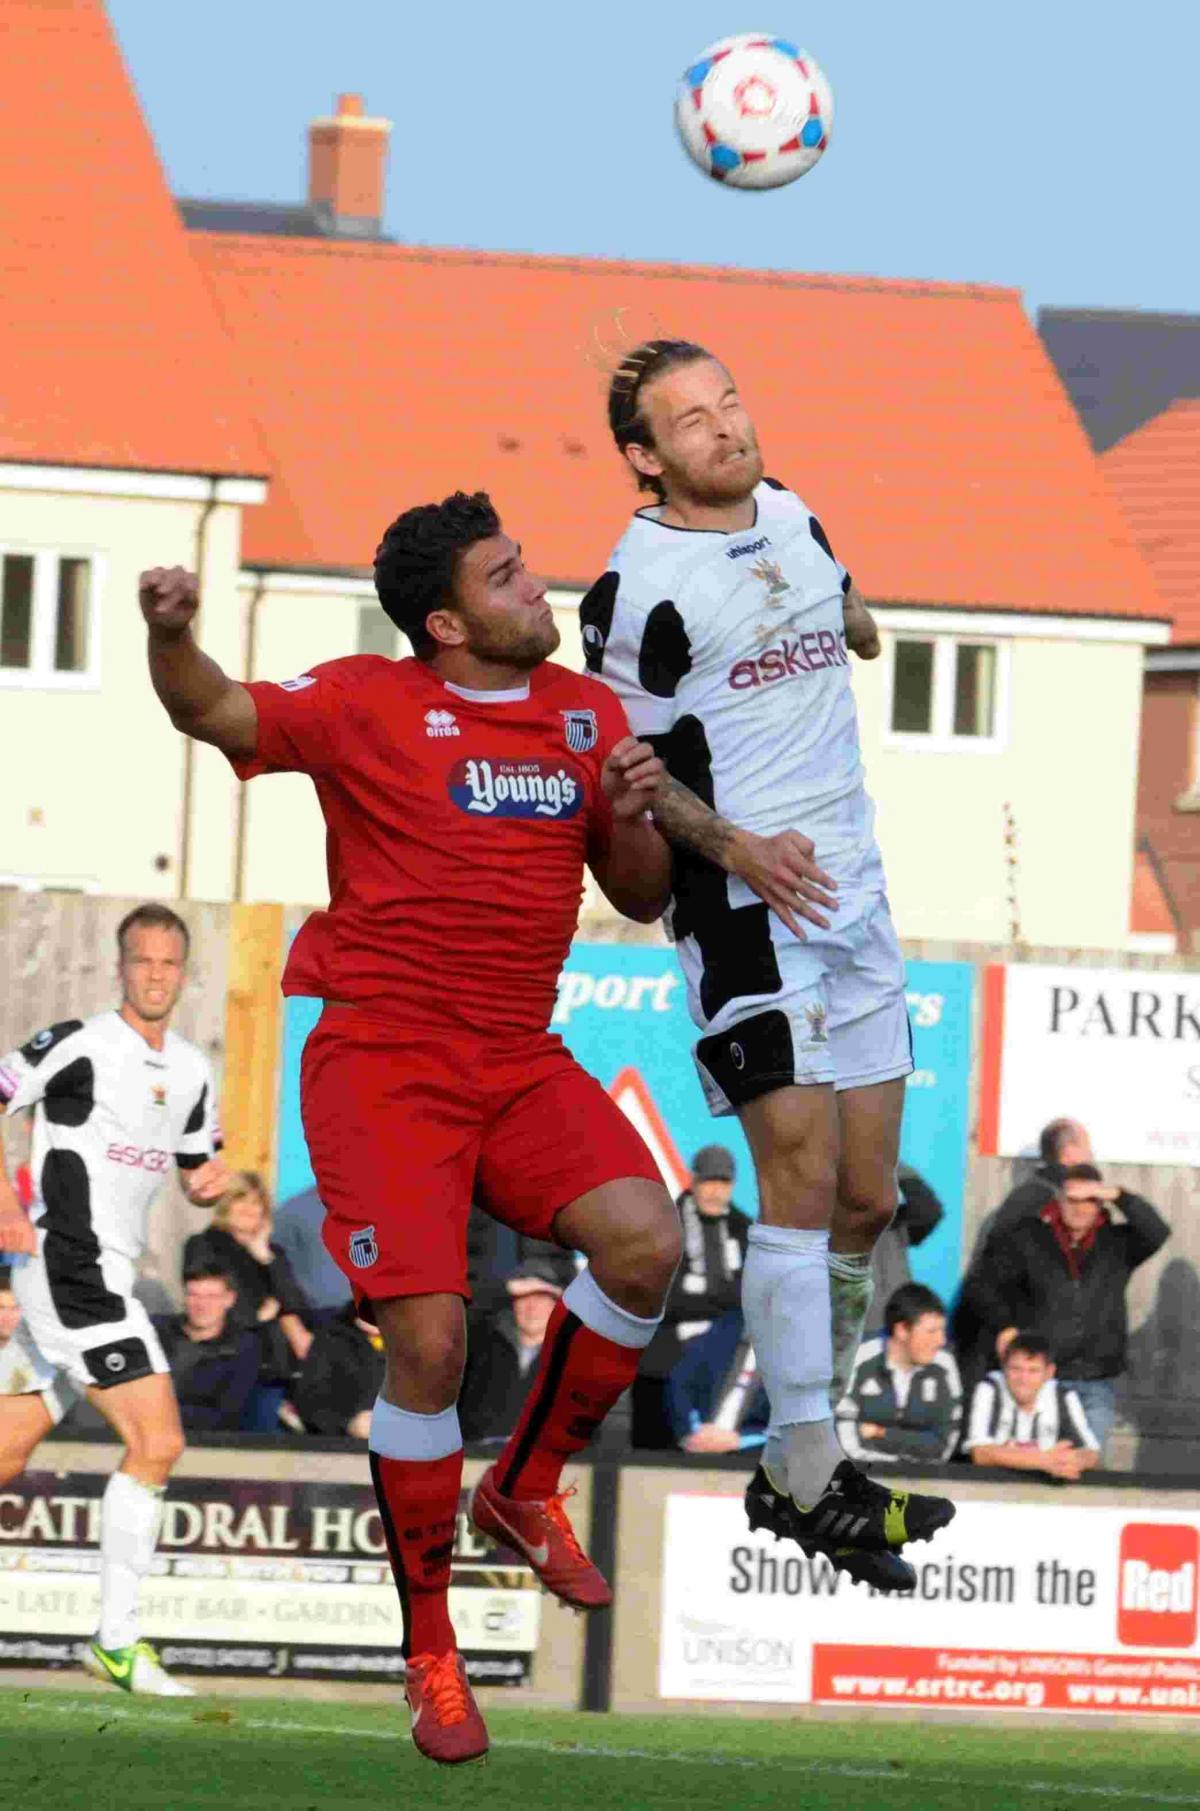 Salisbury City in action with Grimsby Town at Old Sarum